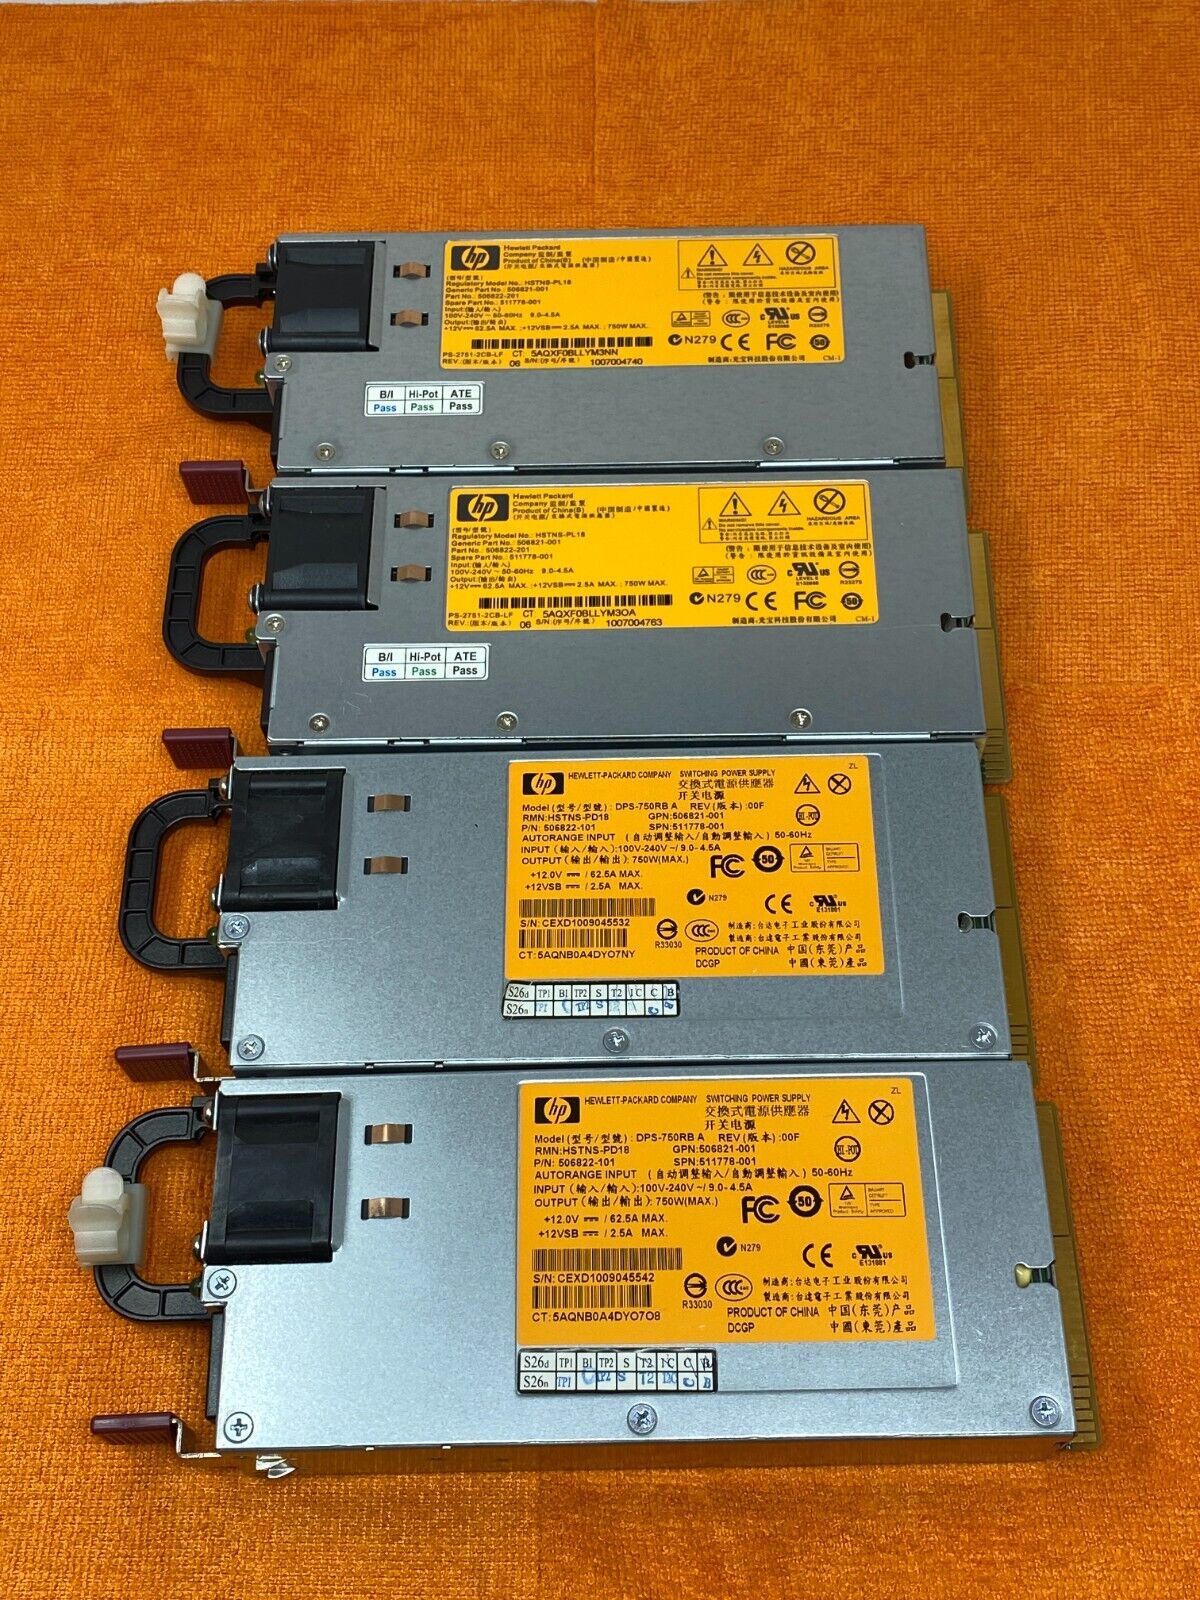 4 LOT OEM HP 750W 506822-101 DPS-750RB A HOT PLUGGABLE PROLIANT POWER SUPPLY